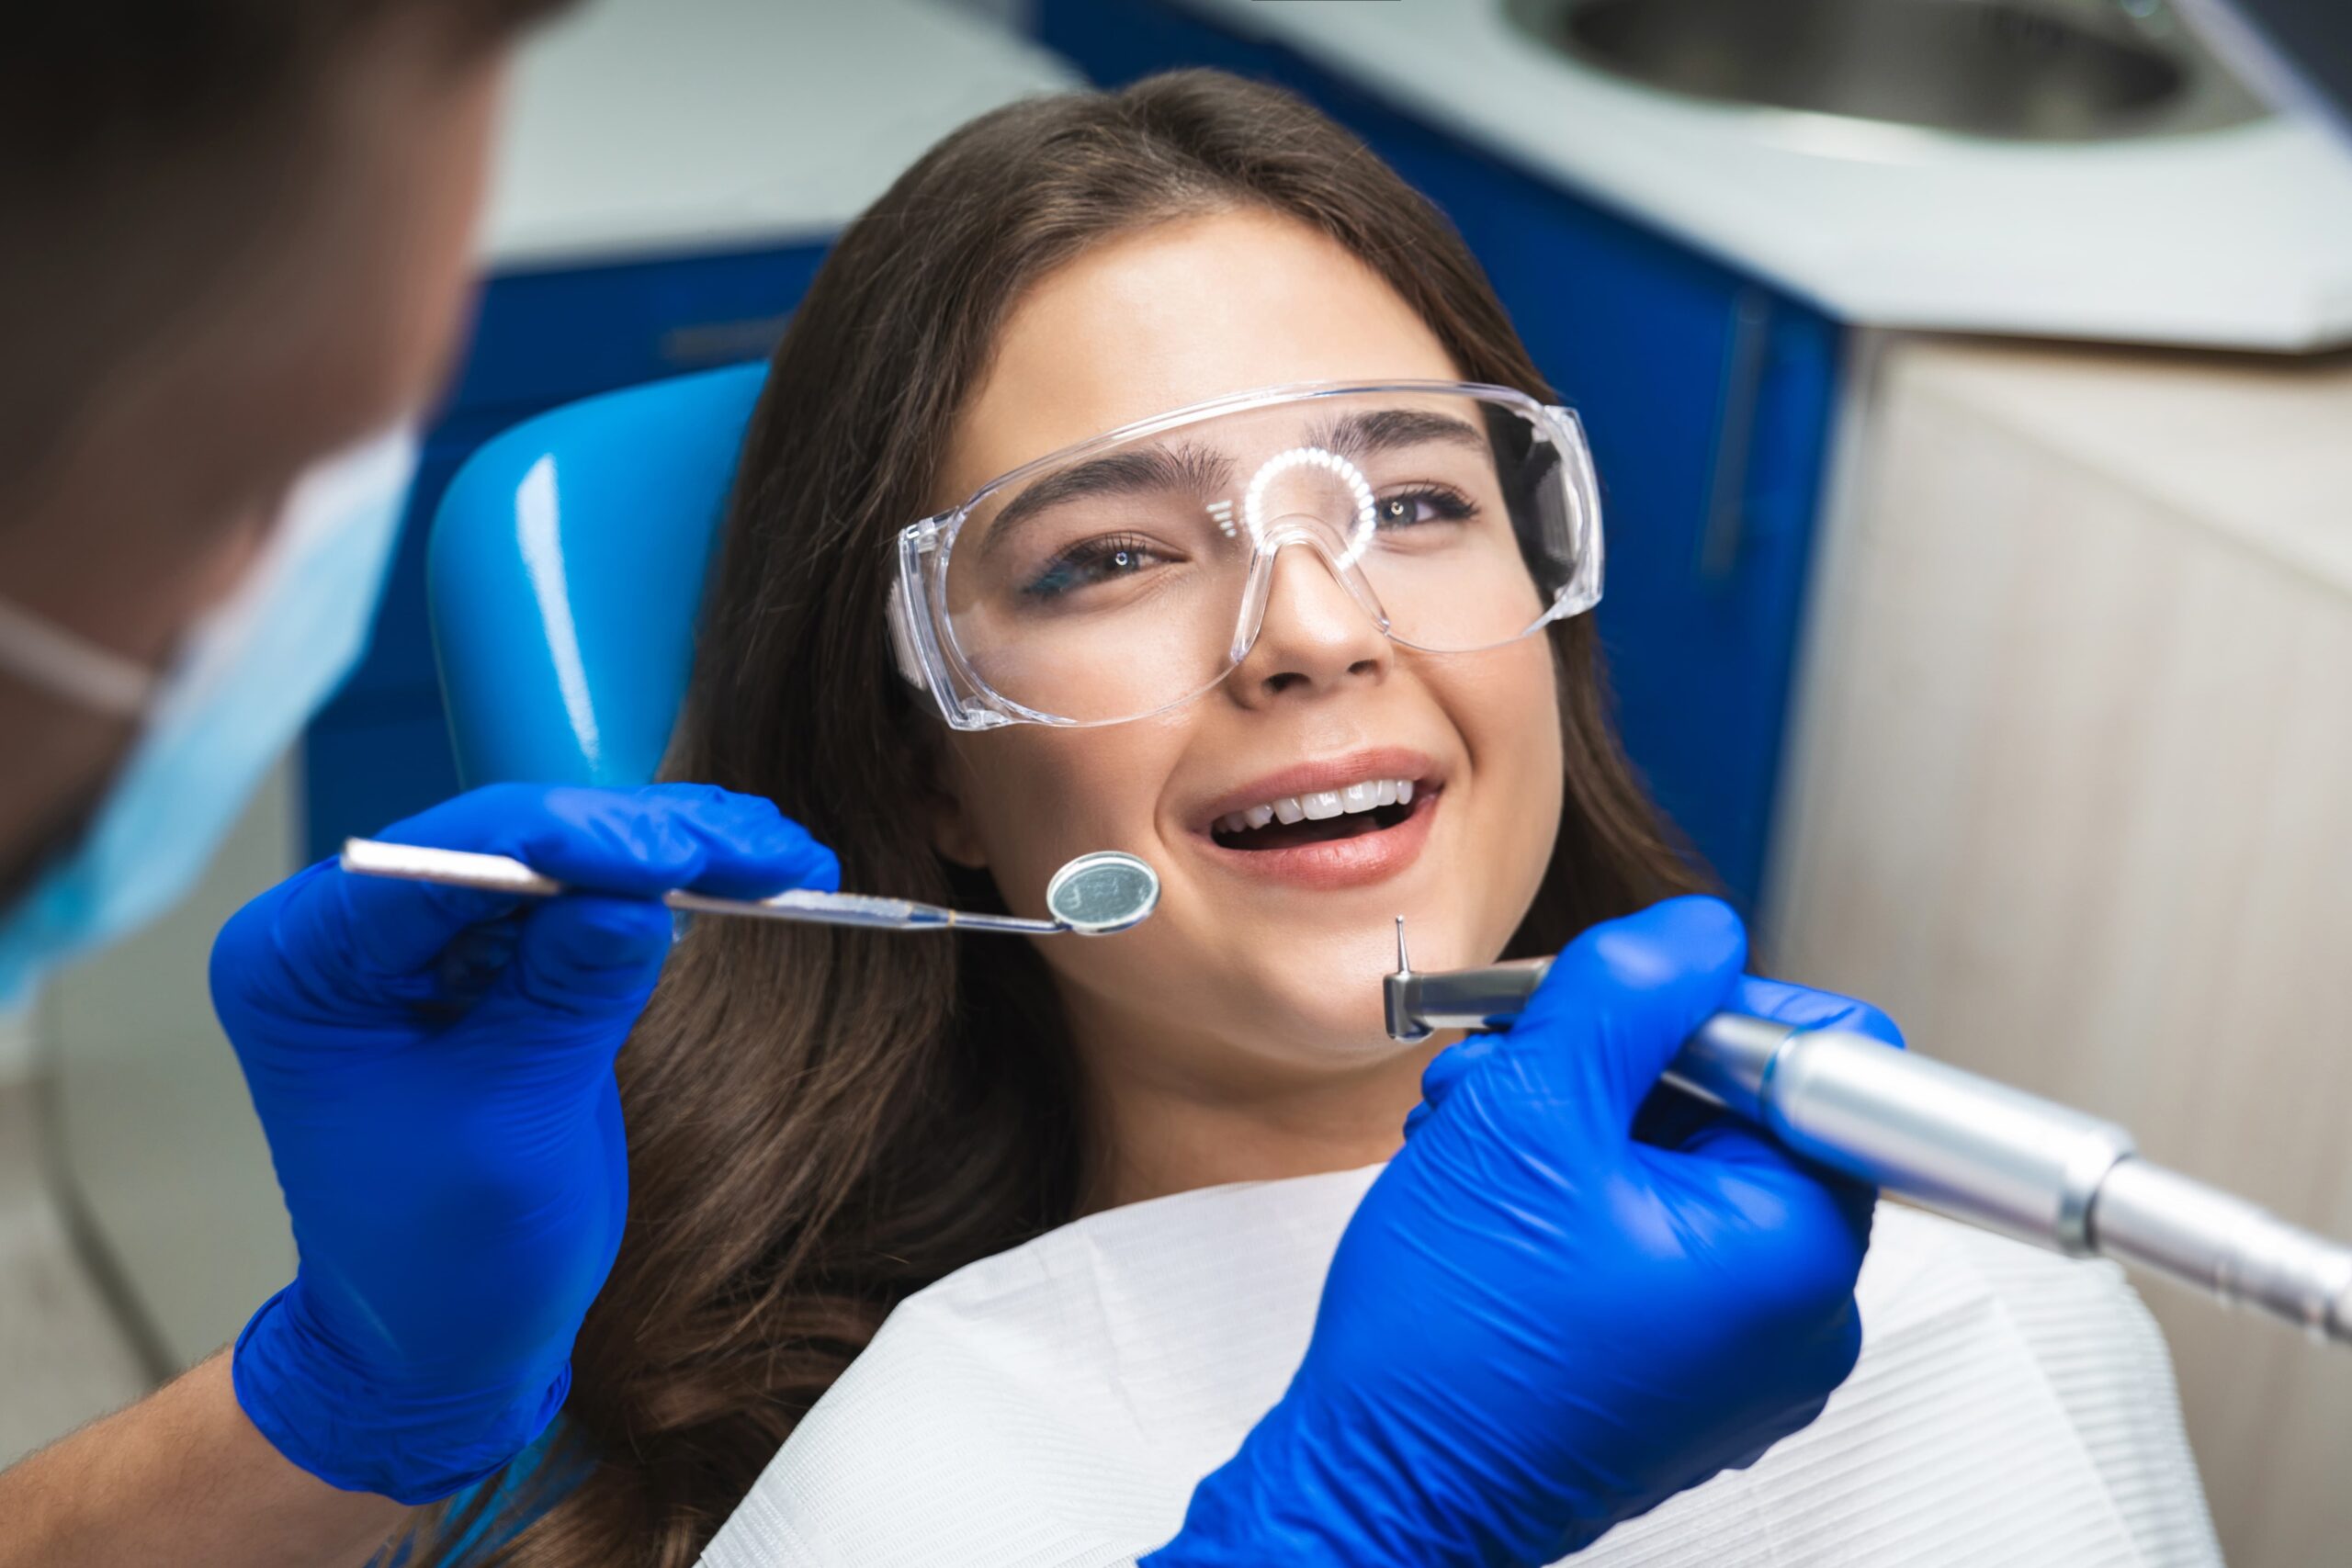 A young woman in a dentists chare with clear plastic glasses and a dental bib smiles up at the camera while a dentist in blue gloves reaches in with a mirror and scaler.